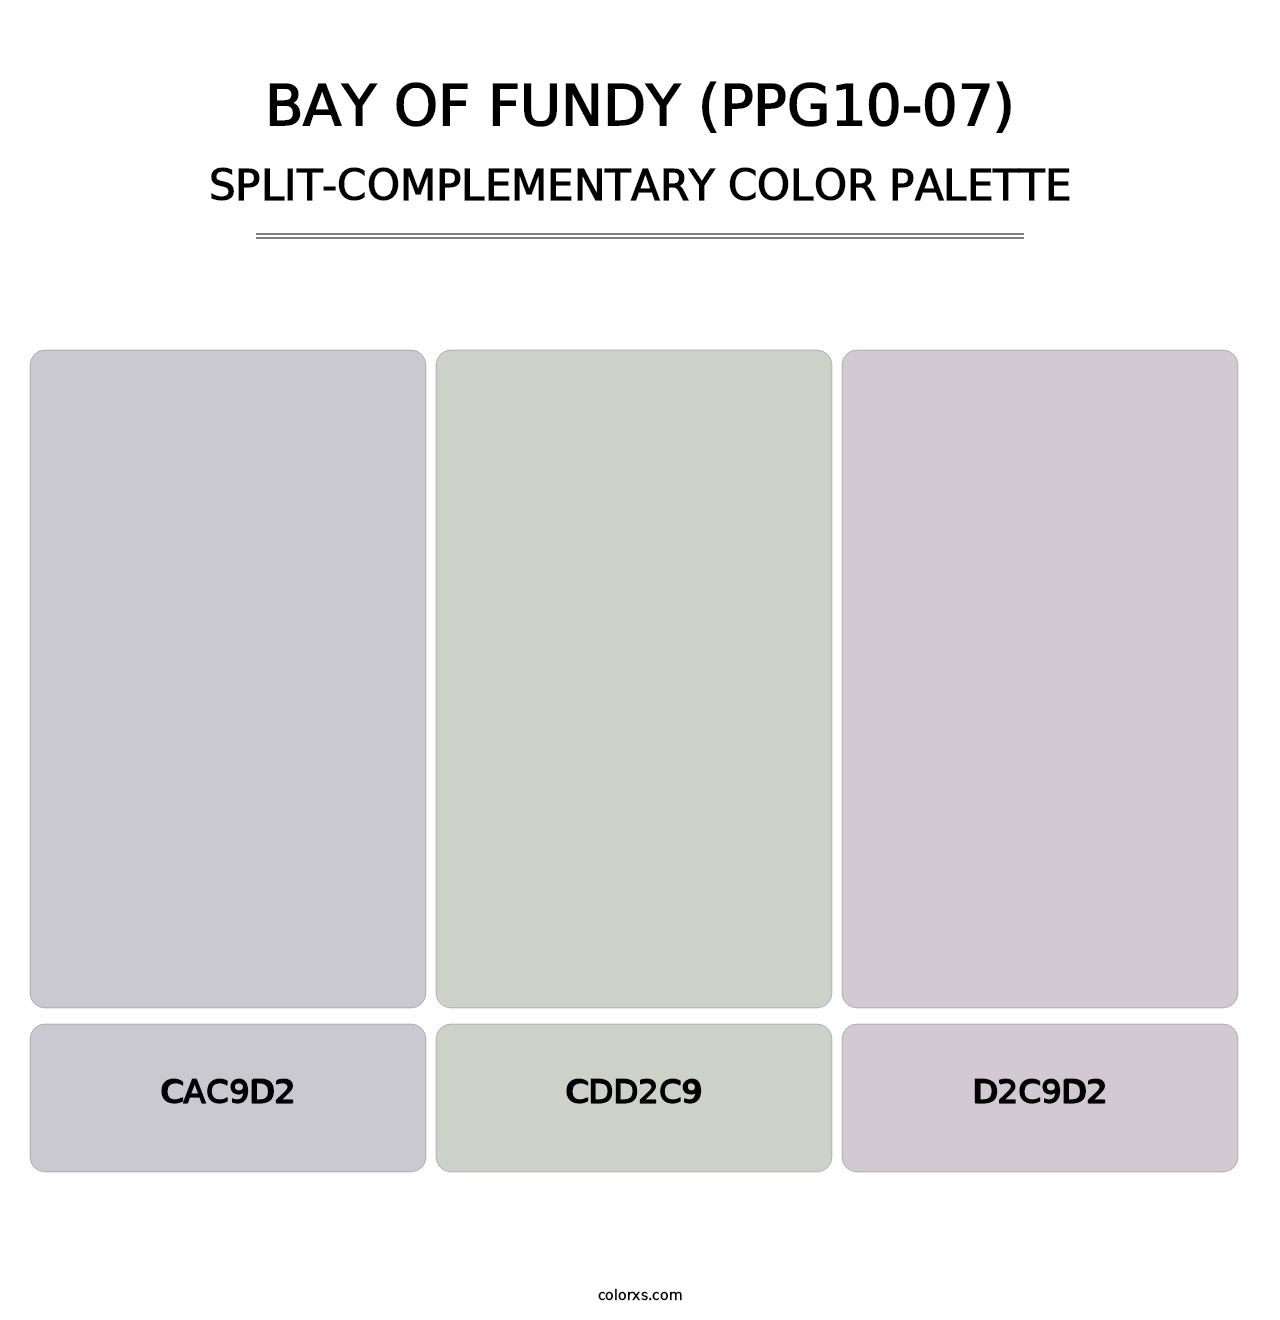 Bay Of Fundy (PPG10-07) - Split-Complementary Color Palette